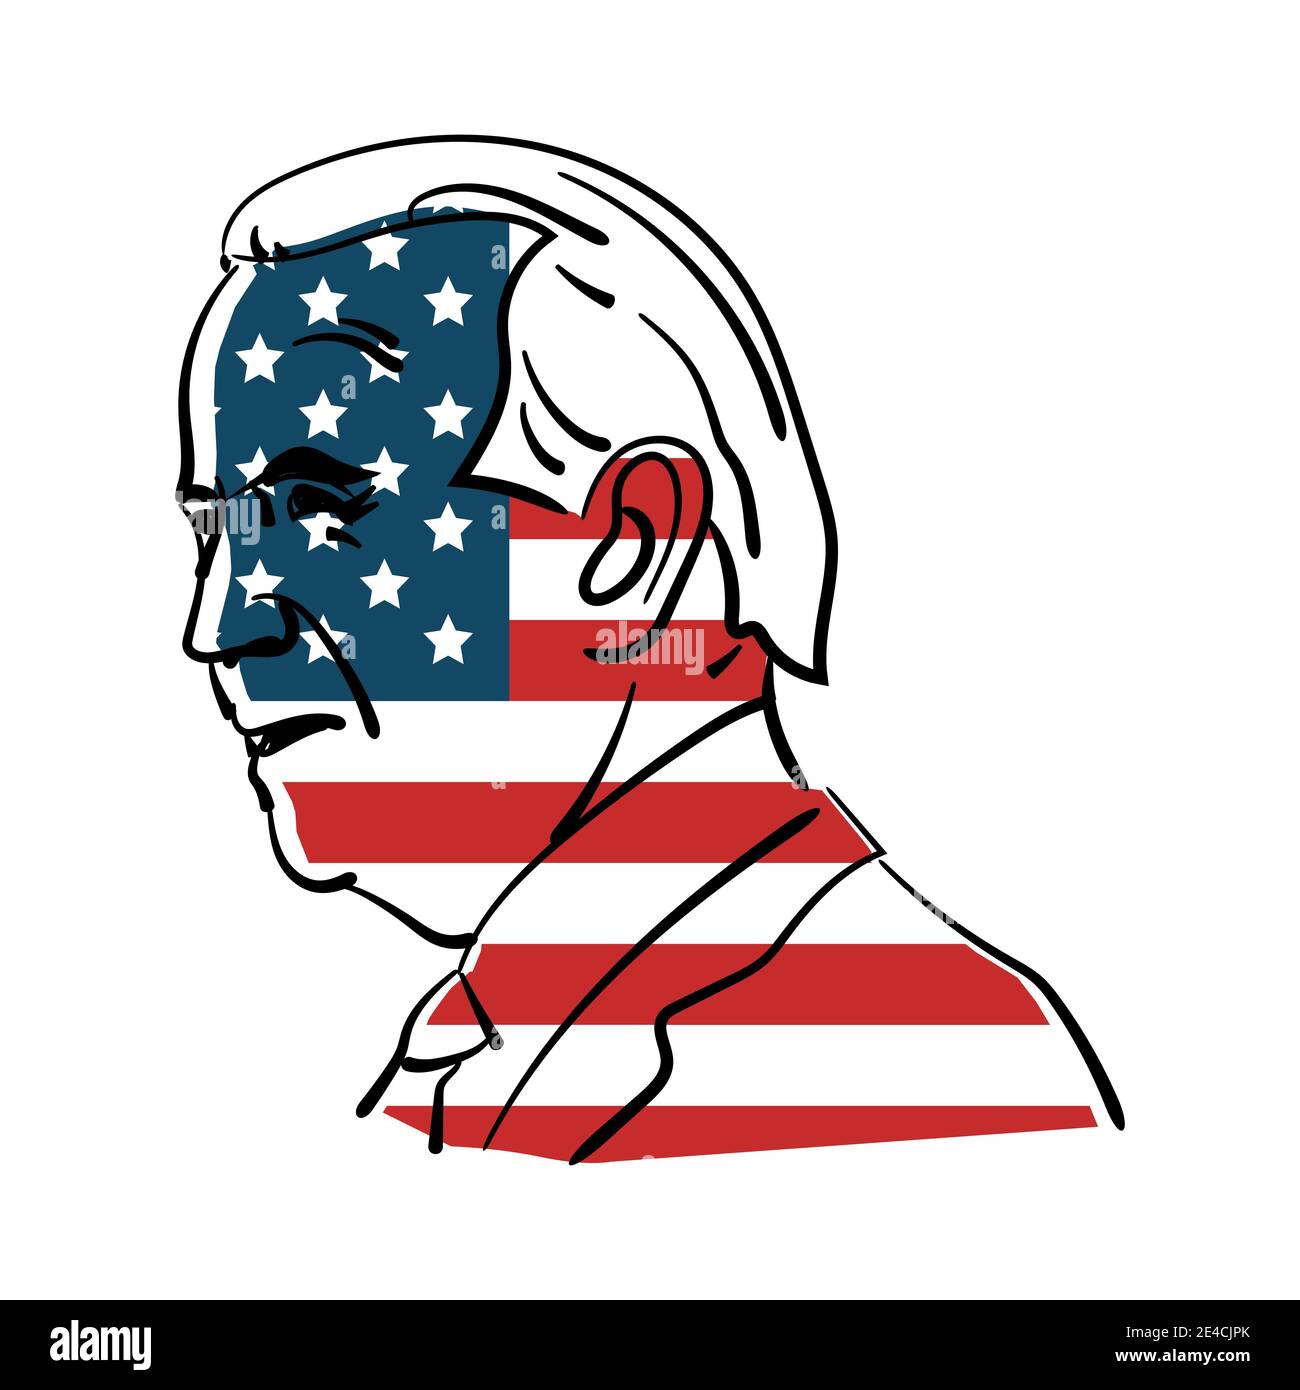 Bangkok THAILAND - Nov 5, 2020 : Hand drawing of Joe Biden with flag of the United States, winner of the United States presidential election. Stock Vector